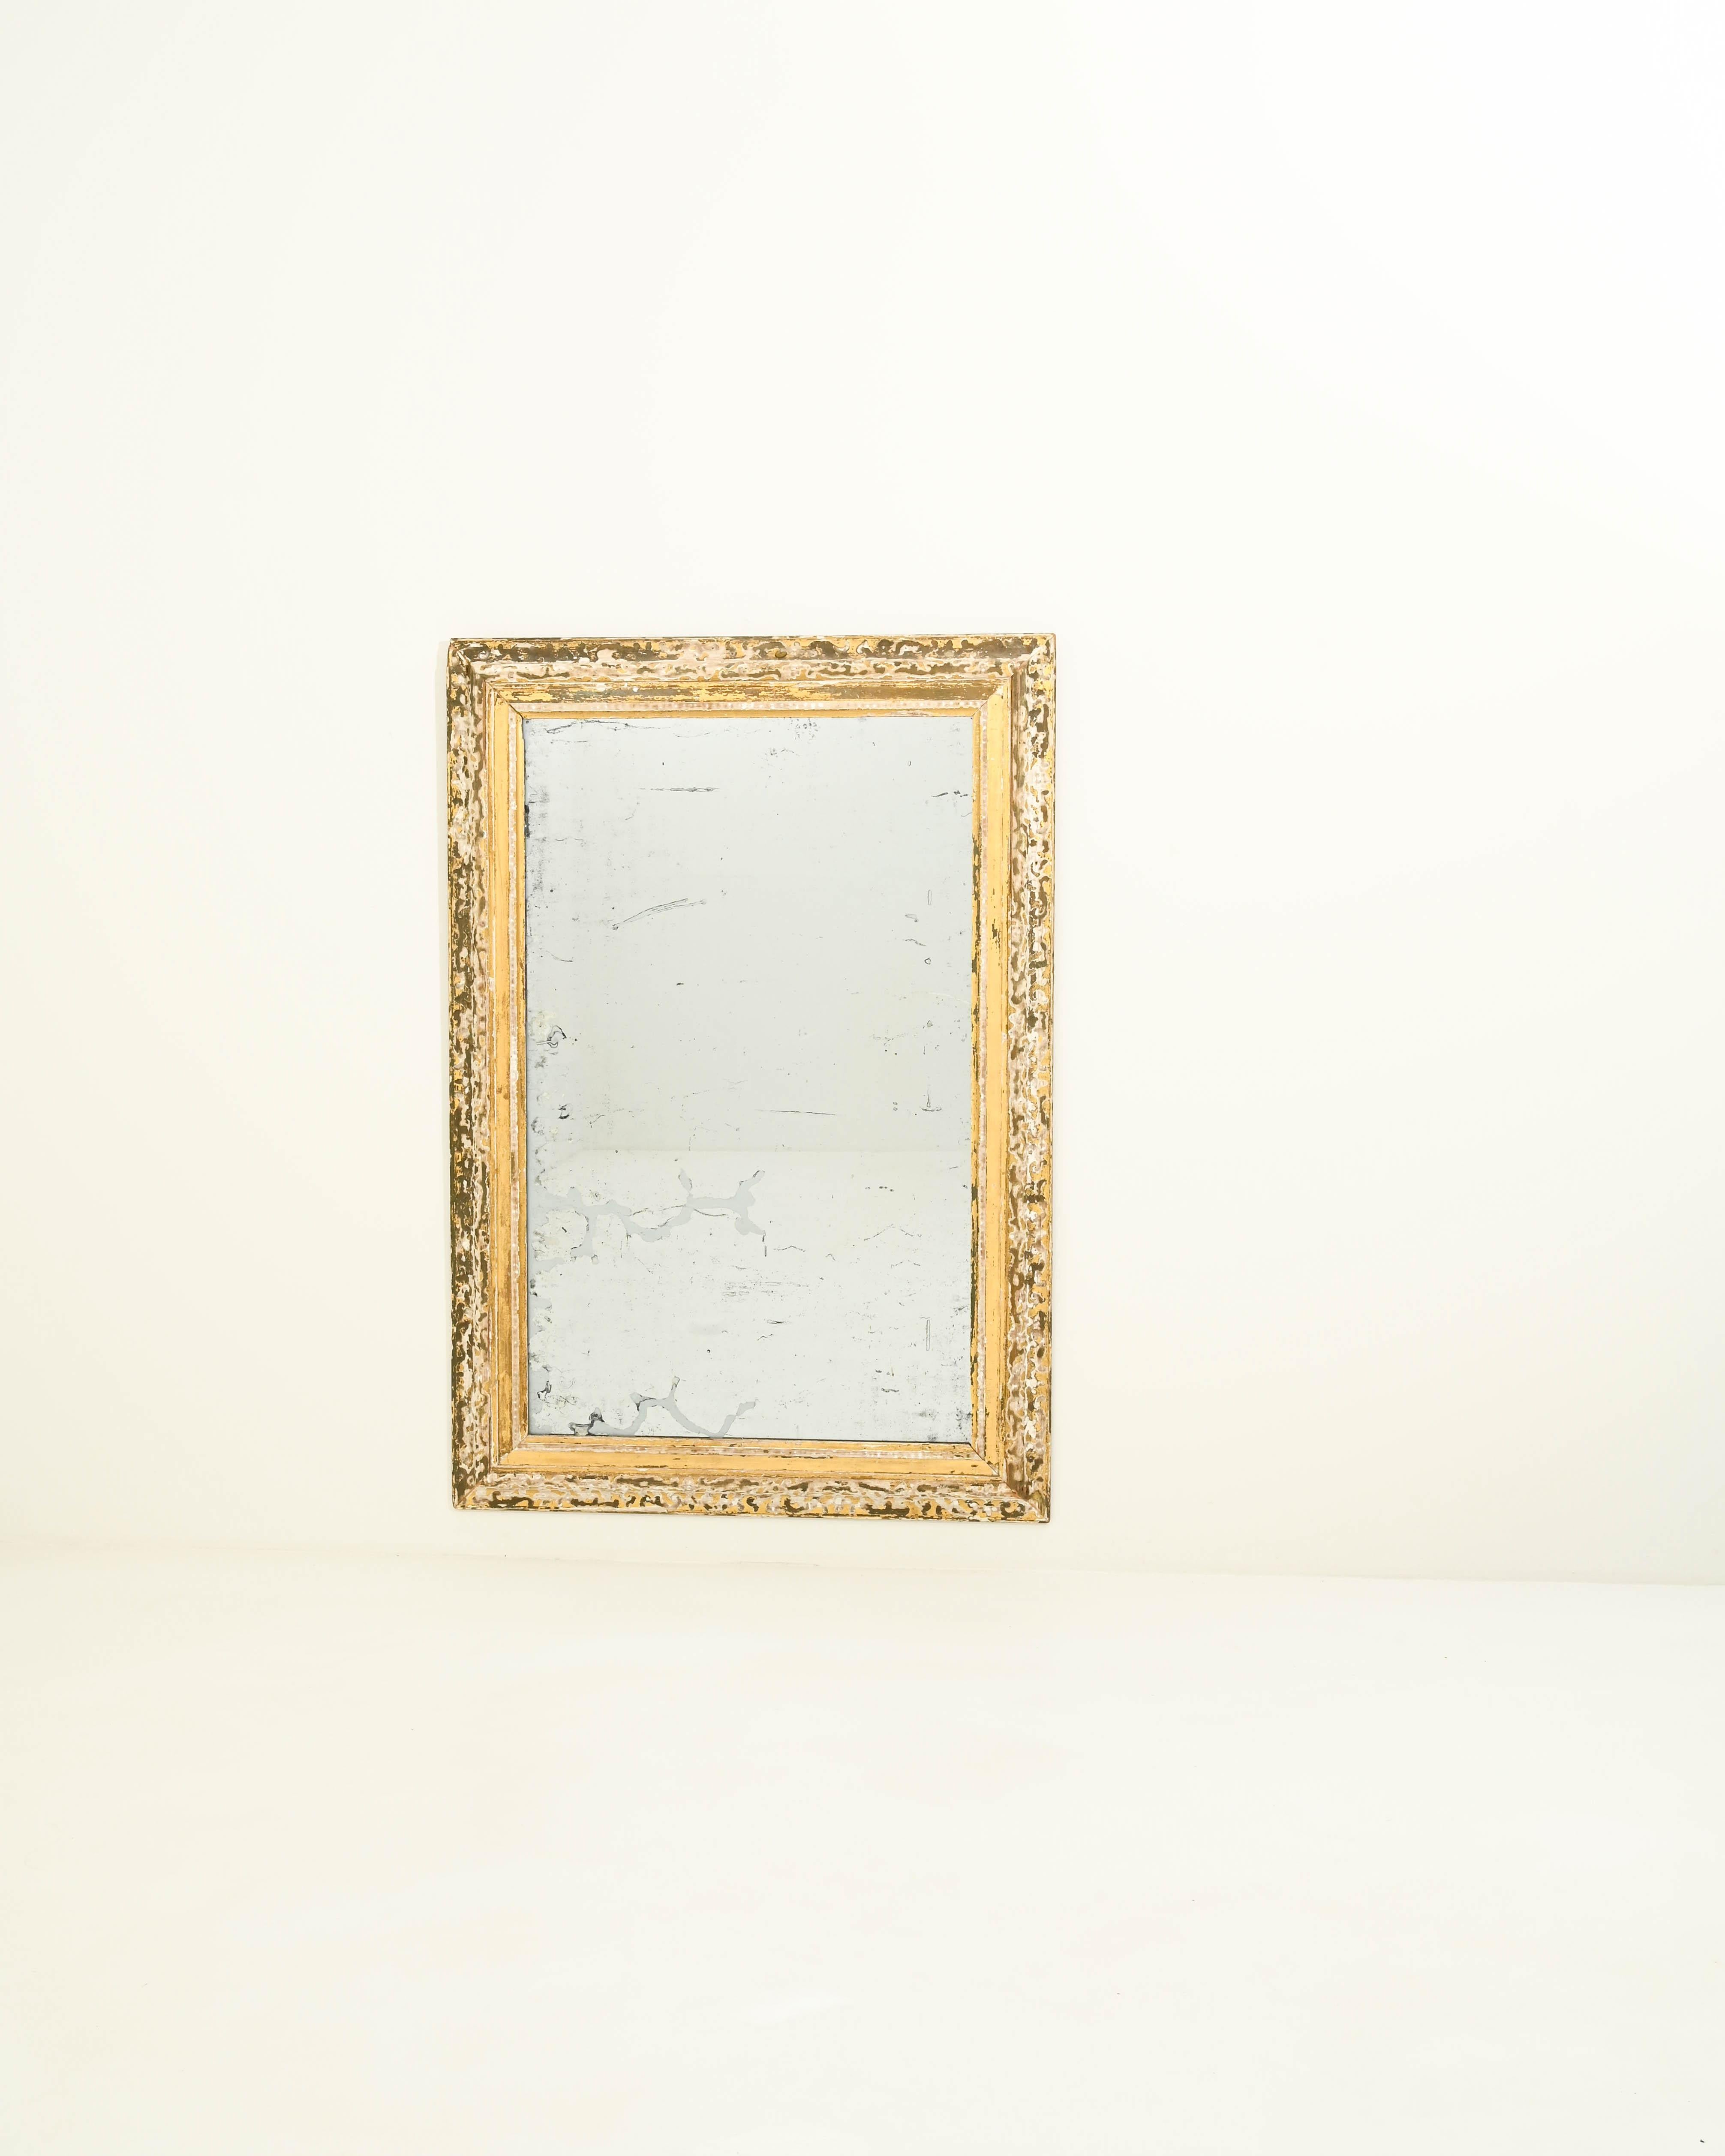 Designed for spacious, opulent rooms, this 19th-century looking glass commands attention with its large-scale presence. The hand-crafted rectangular wooden frame showcases intricate patterns etched by a distressed golden leaf patina. The richly